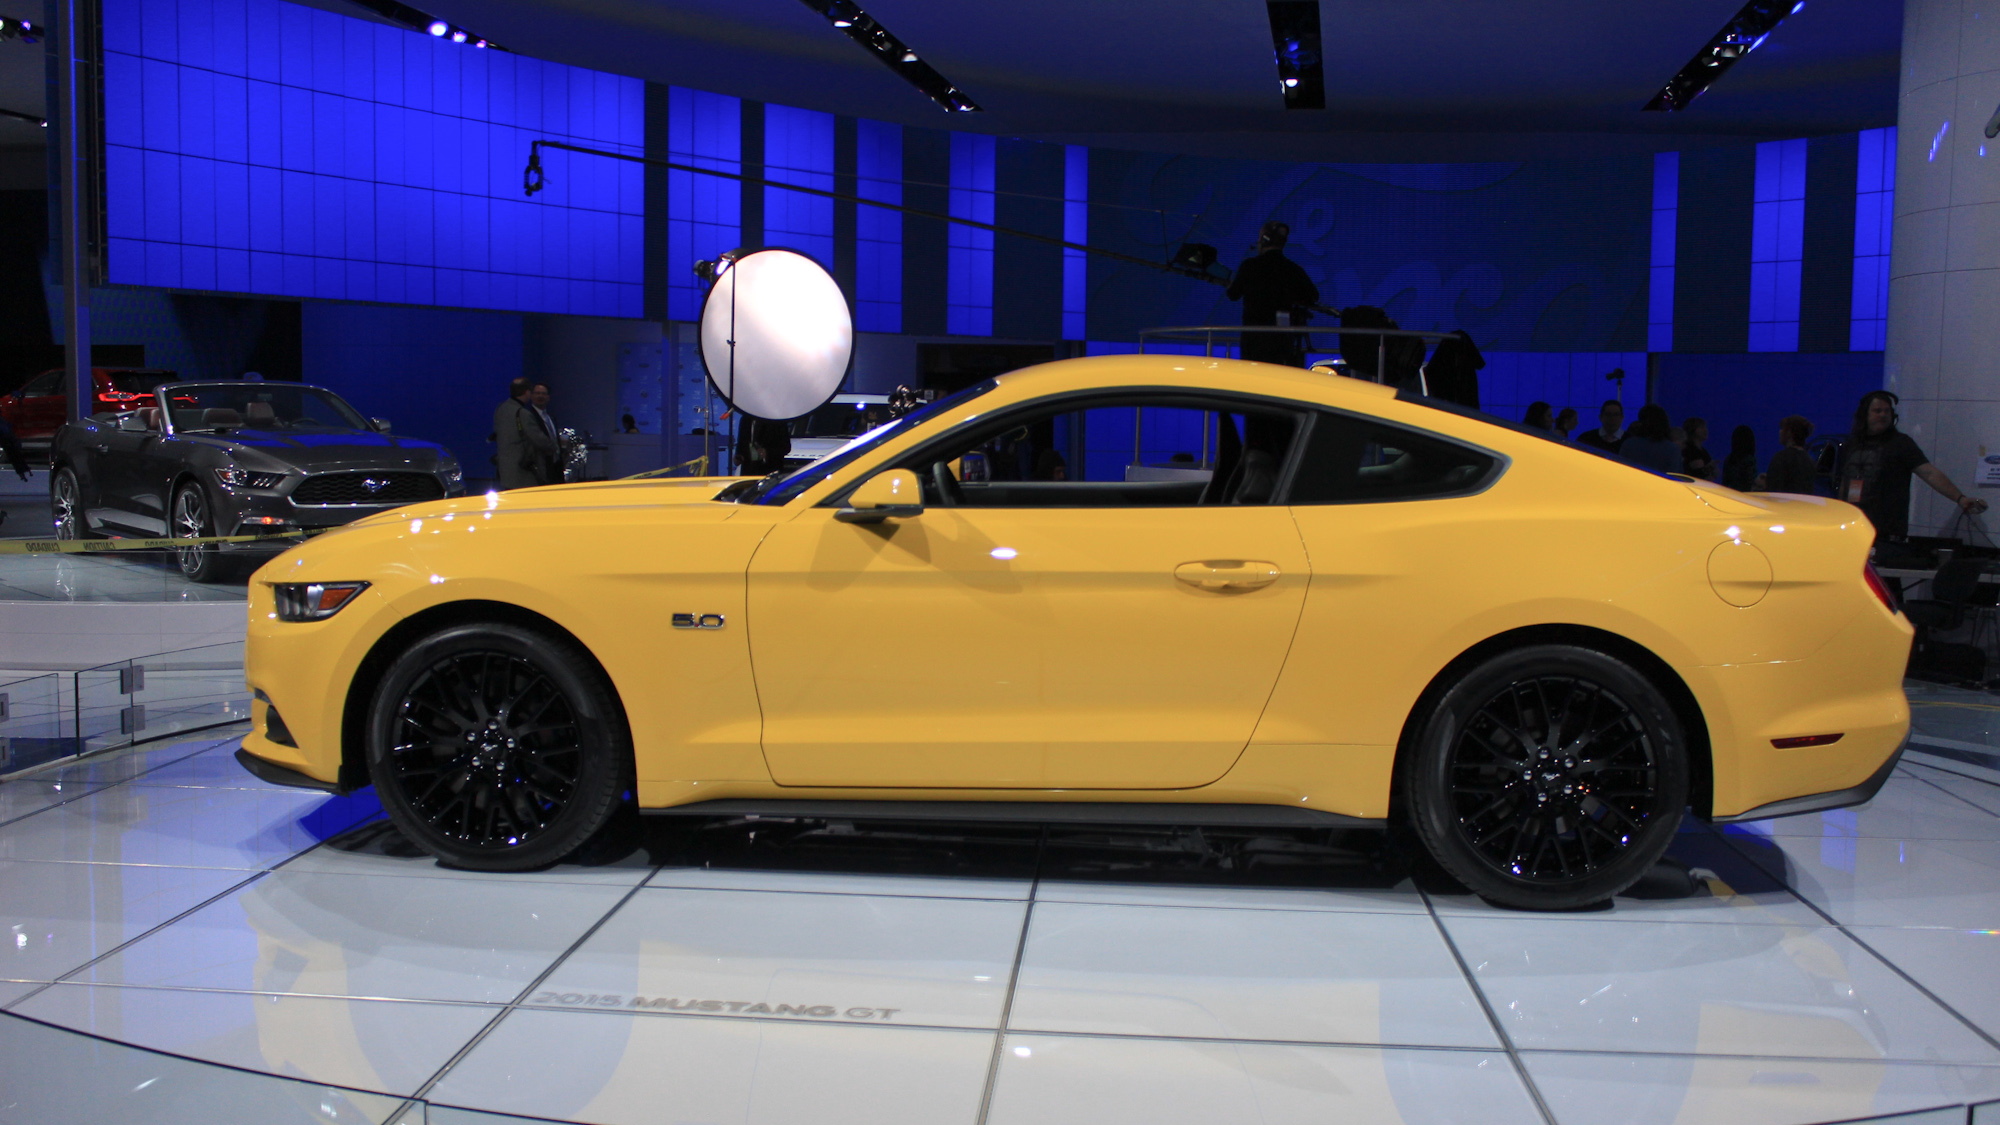 2015 Ford Mustang live photos, 2014 Detroit Auto Show